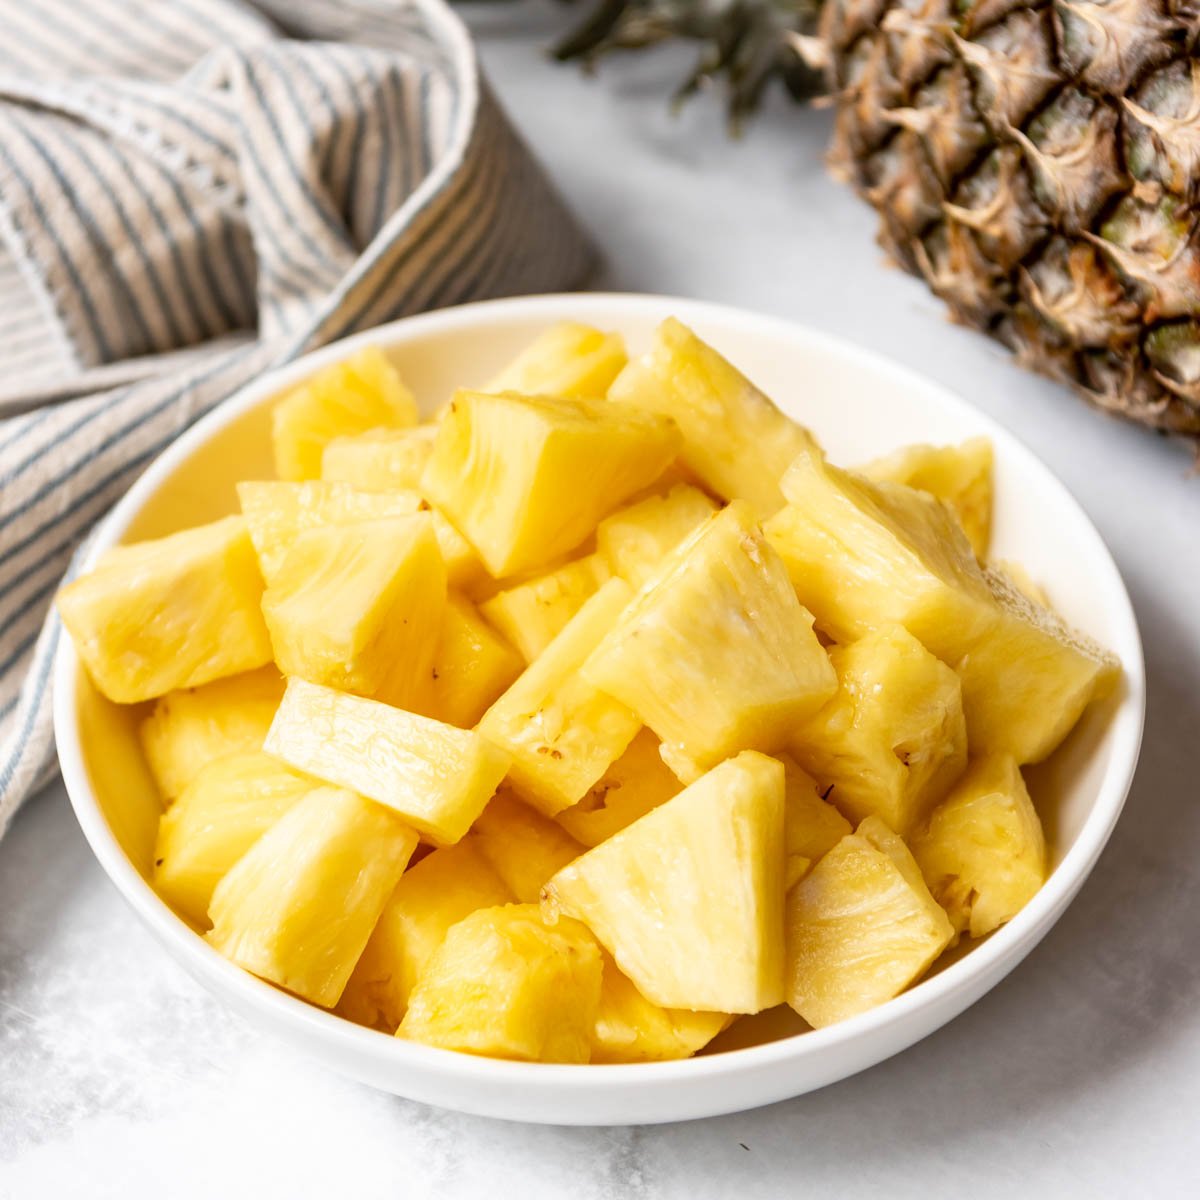 How to Cut A Pineapple - House of Nash Eats